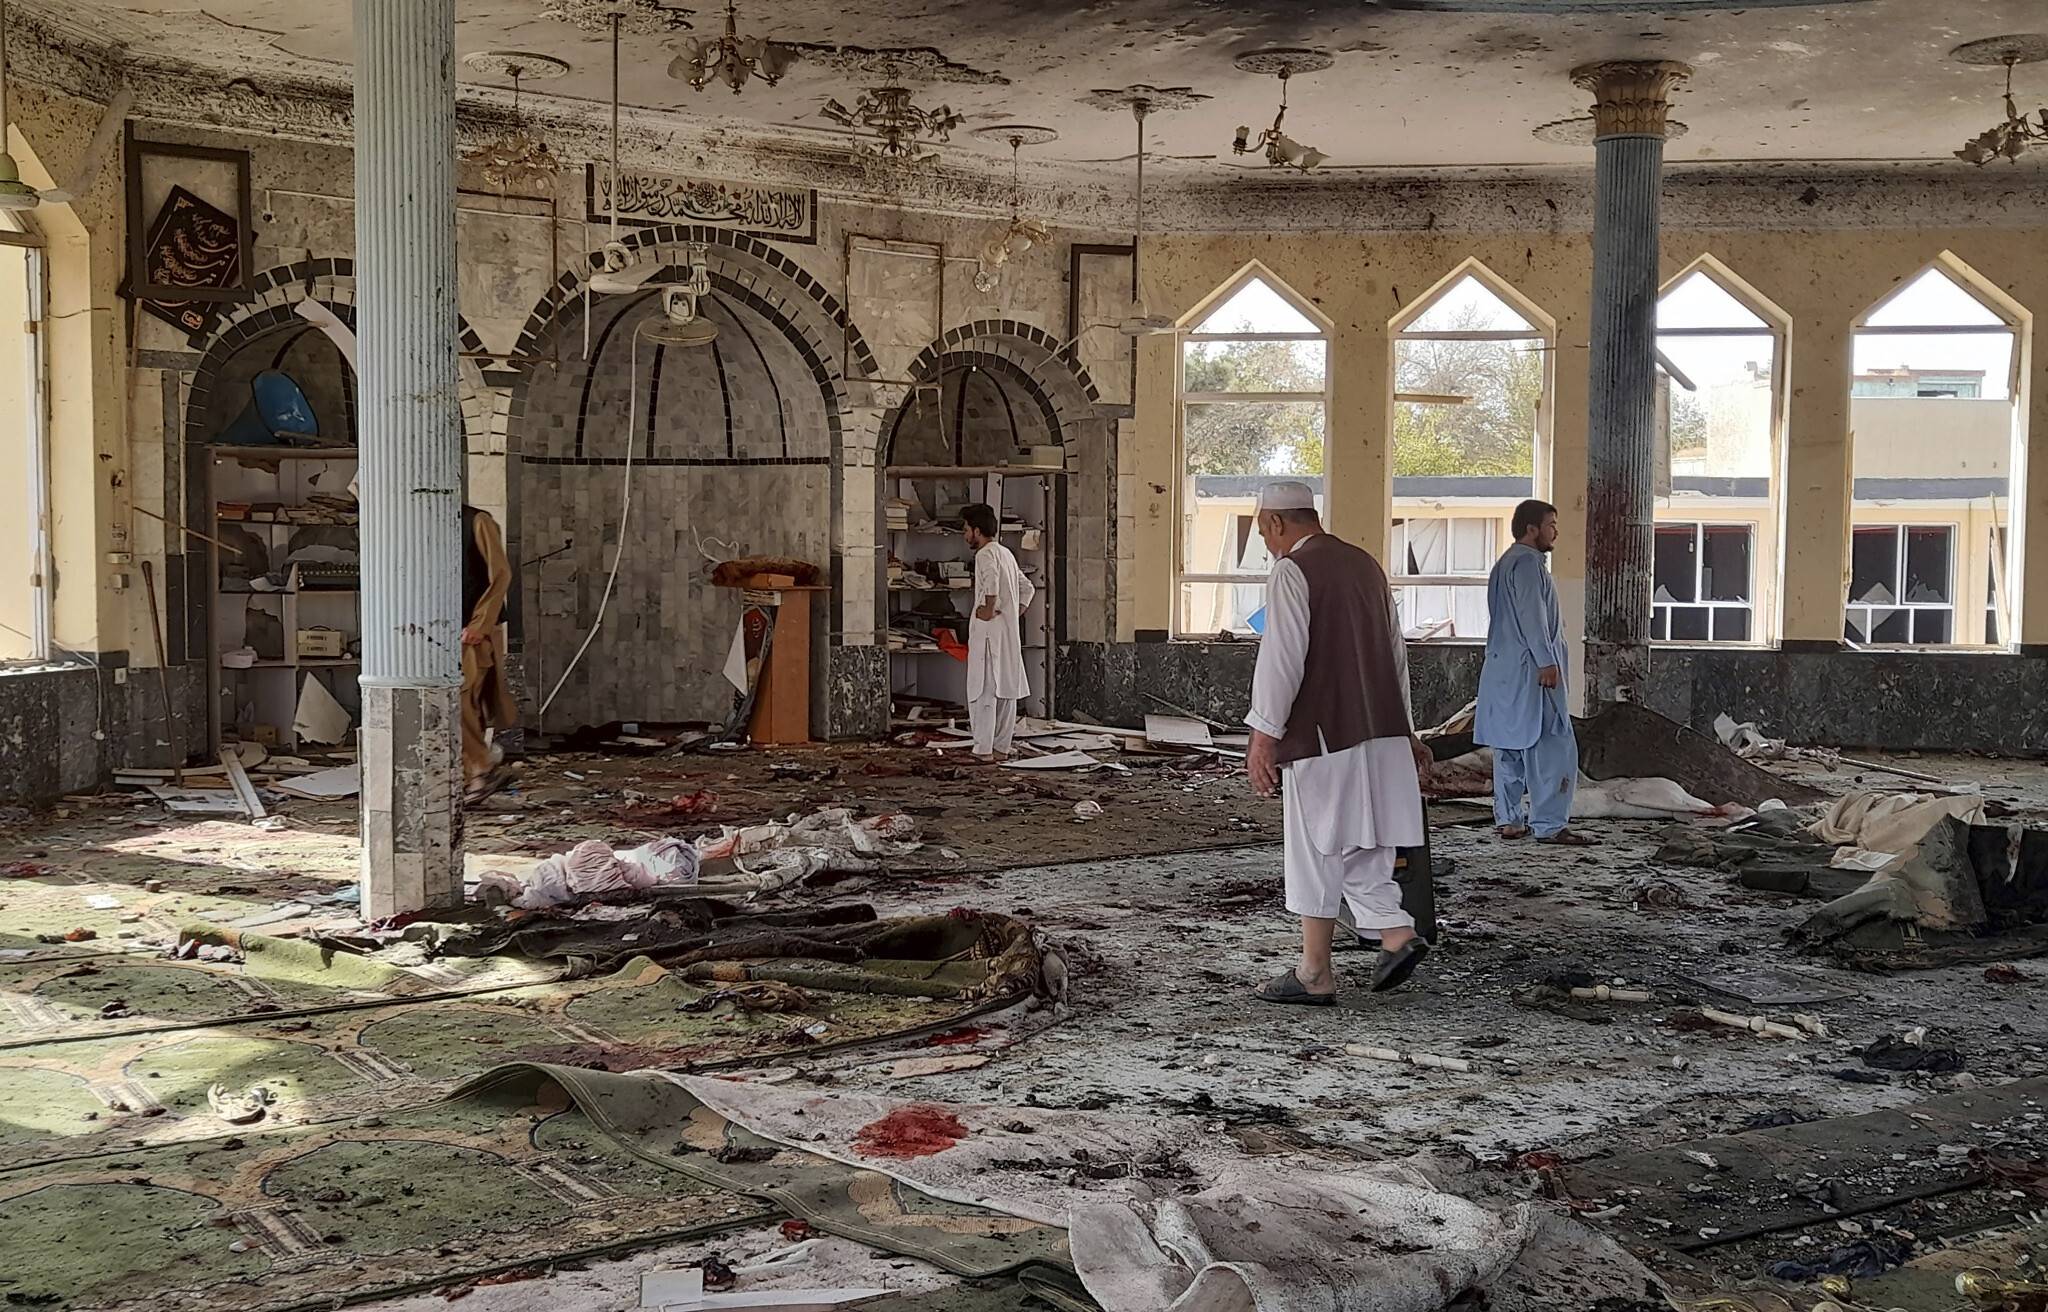 Kunduz mosque in Afghanistan attacked during Friday prayers